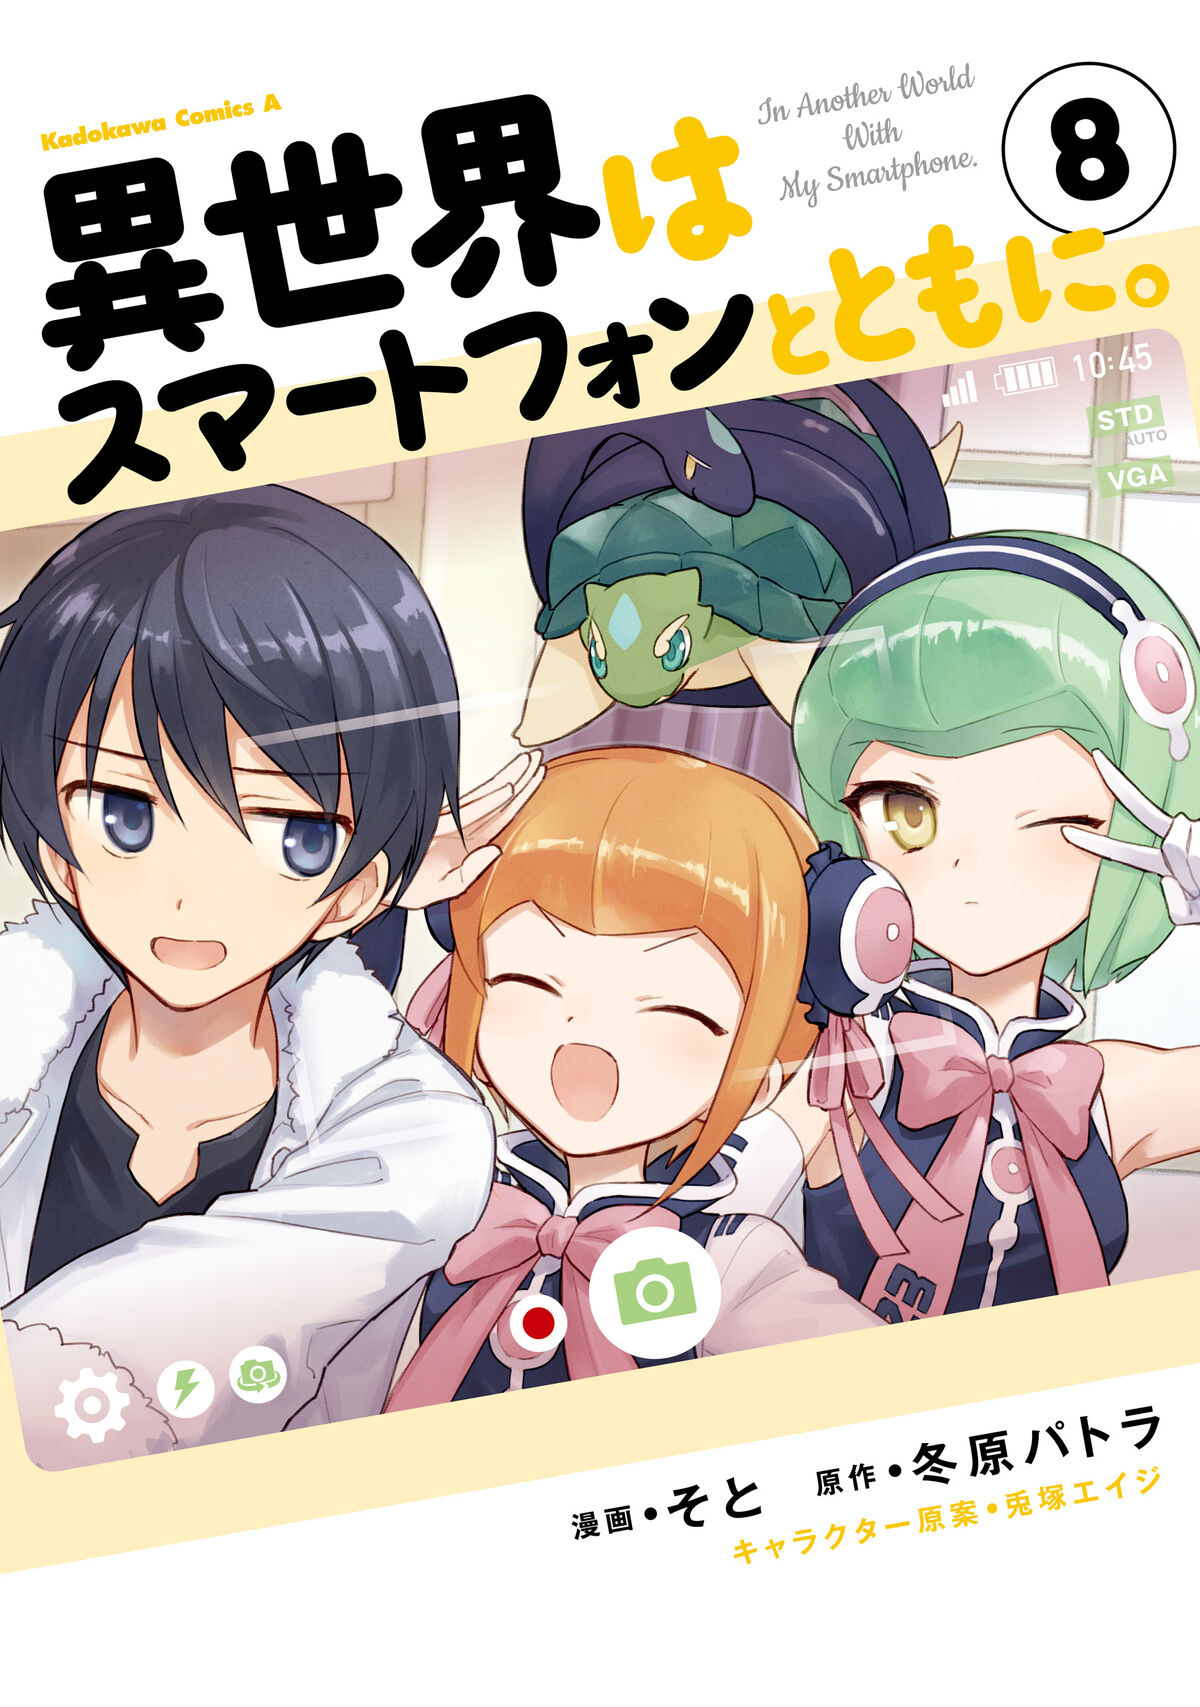 In Another World With My Smartphone Novel Volume 8